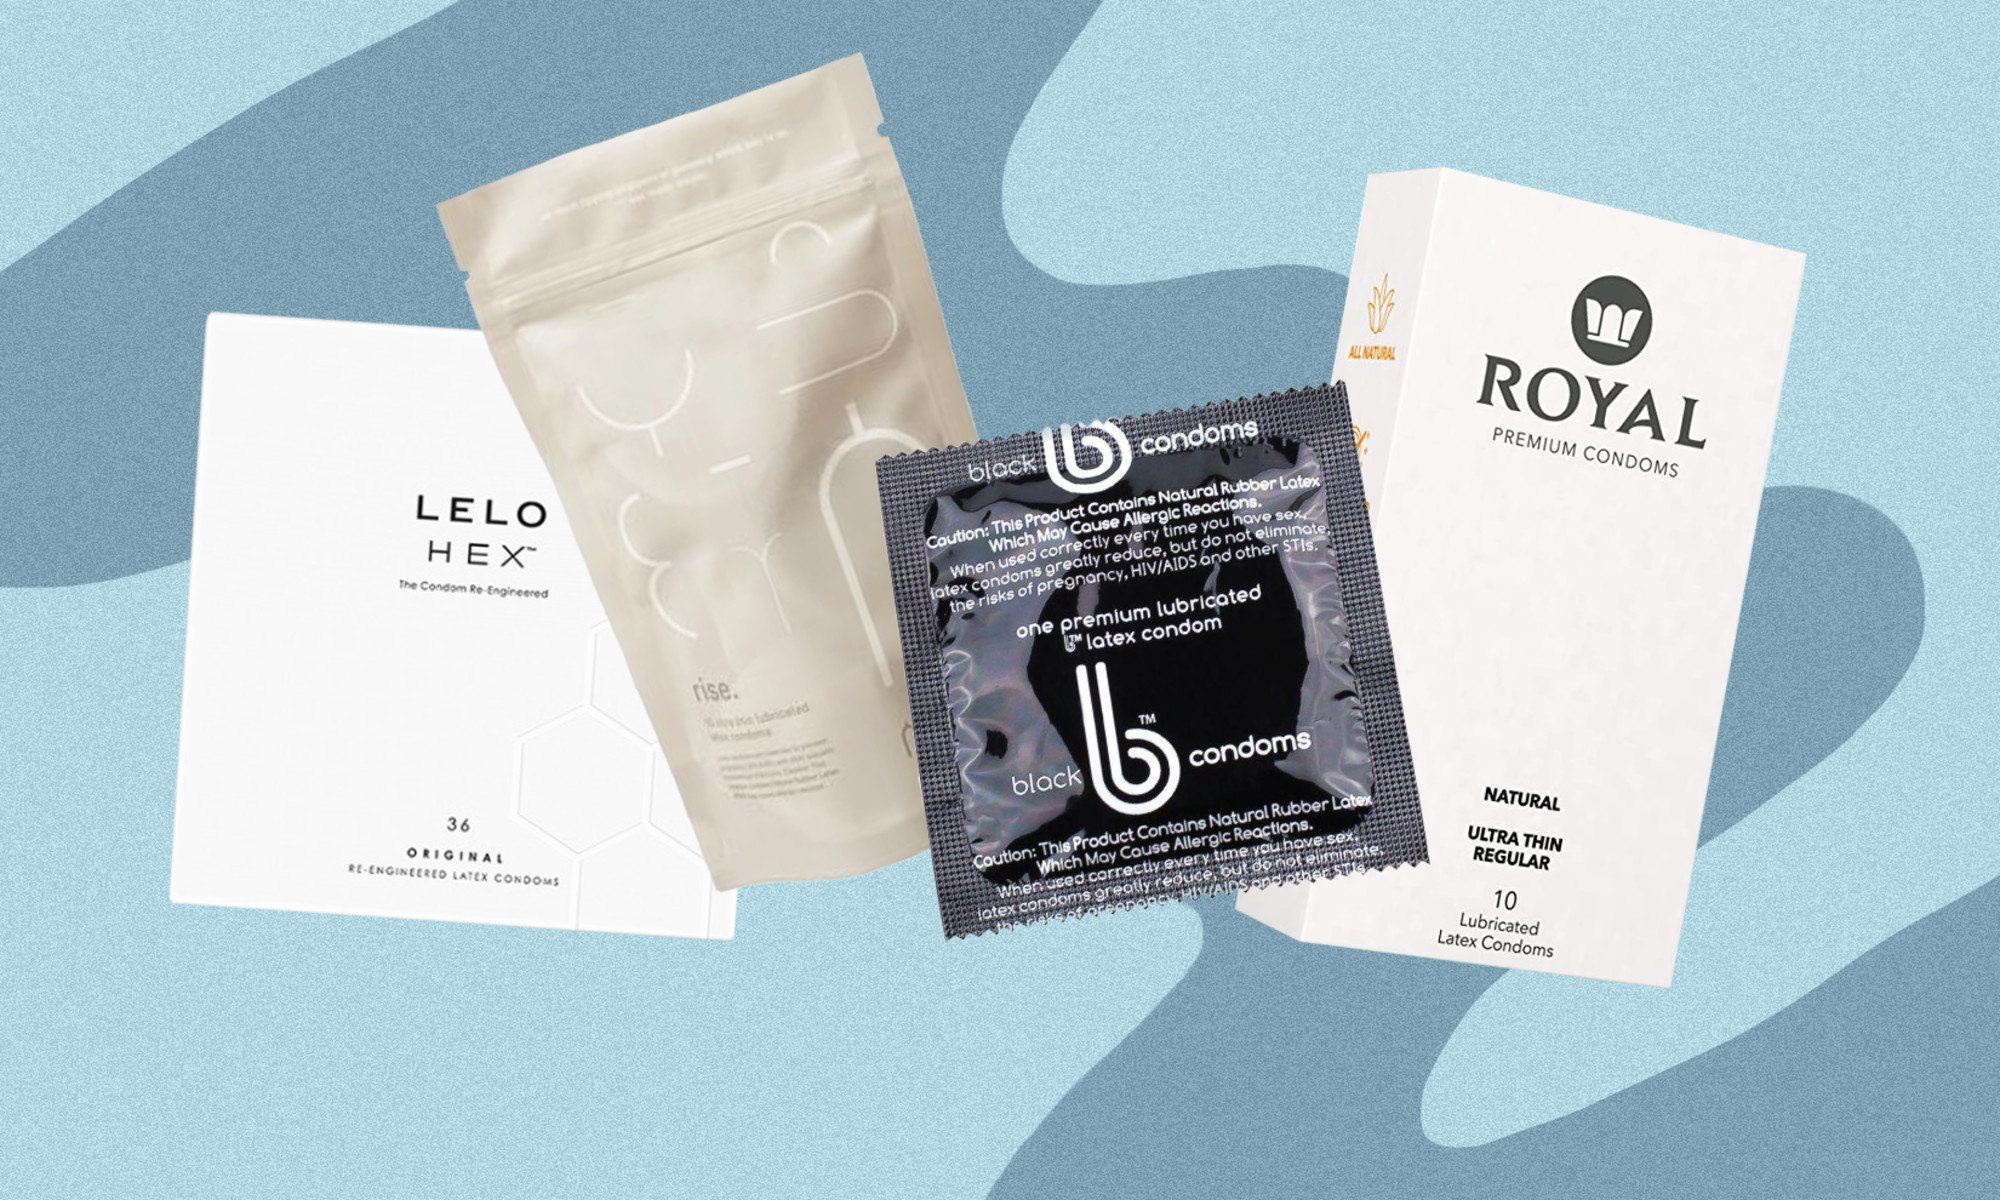 9 Vegan Condoms To Buy In 2023 + What It Means mindbodygreen image picture